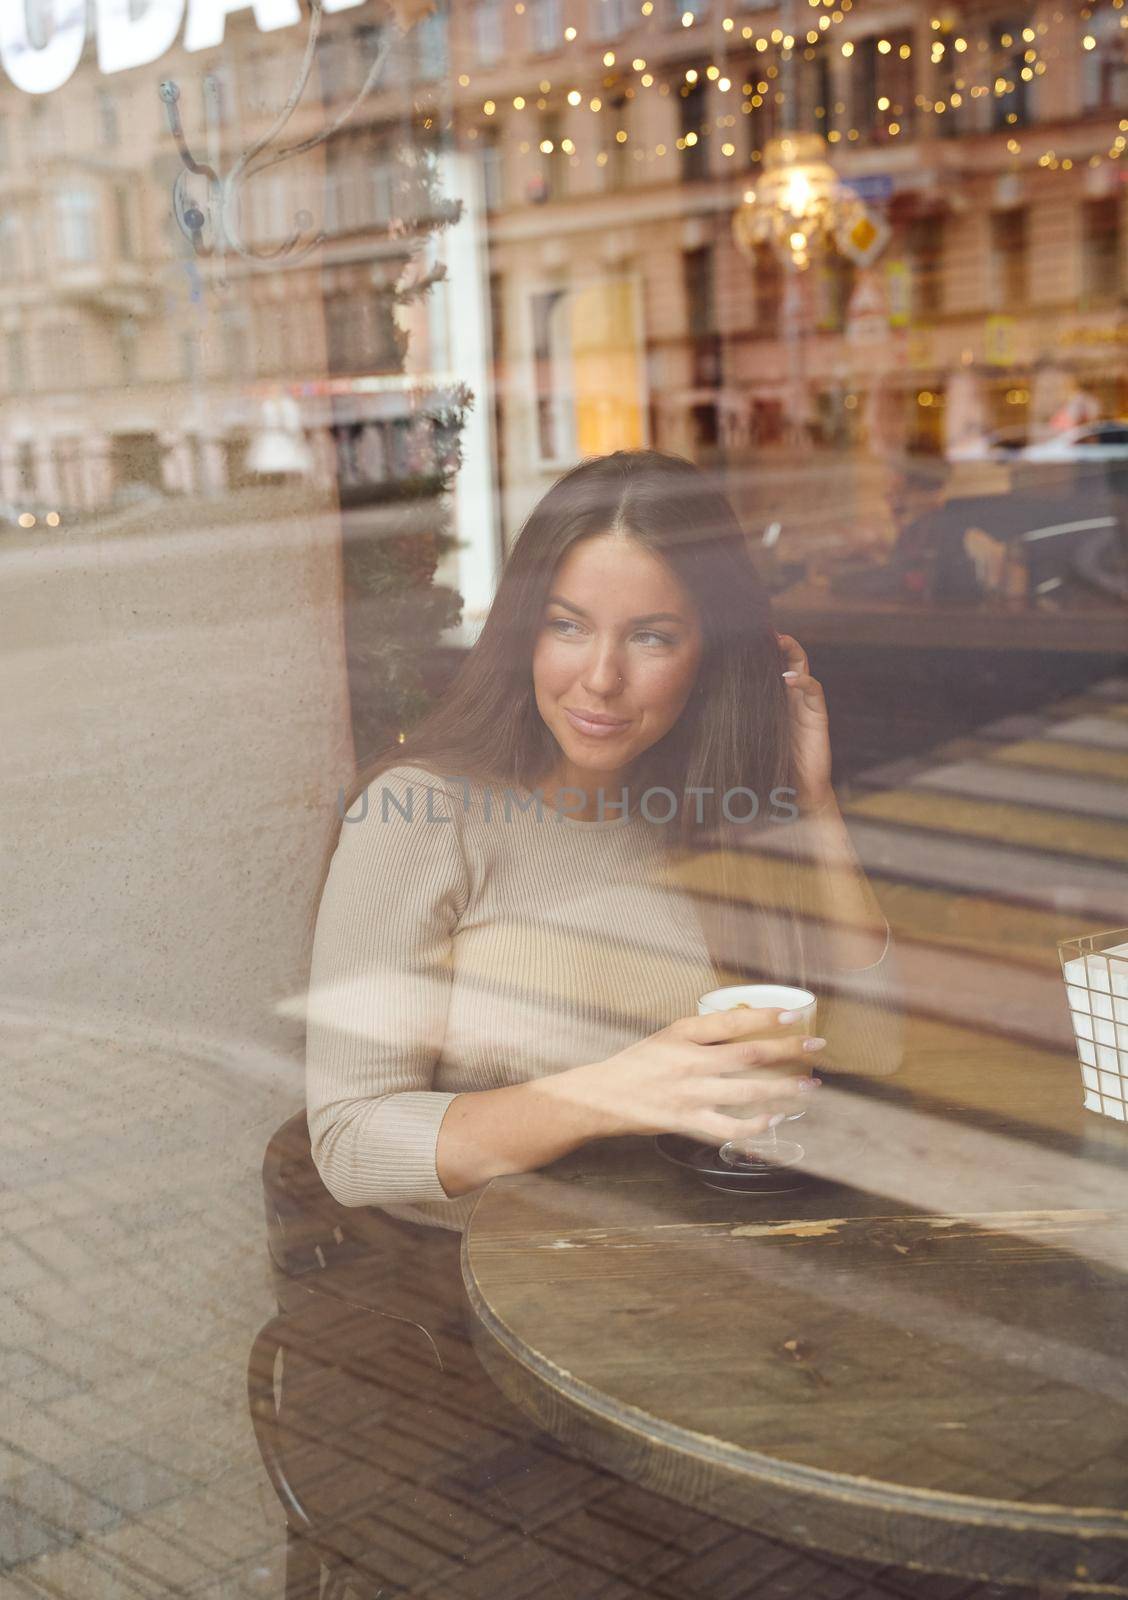 A beautiful girl sits in a cafe and looks out window thoughtfully. Reflection of city in window. Brunette woman with long hair smiling and drinking cappuccino coffee, vertical